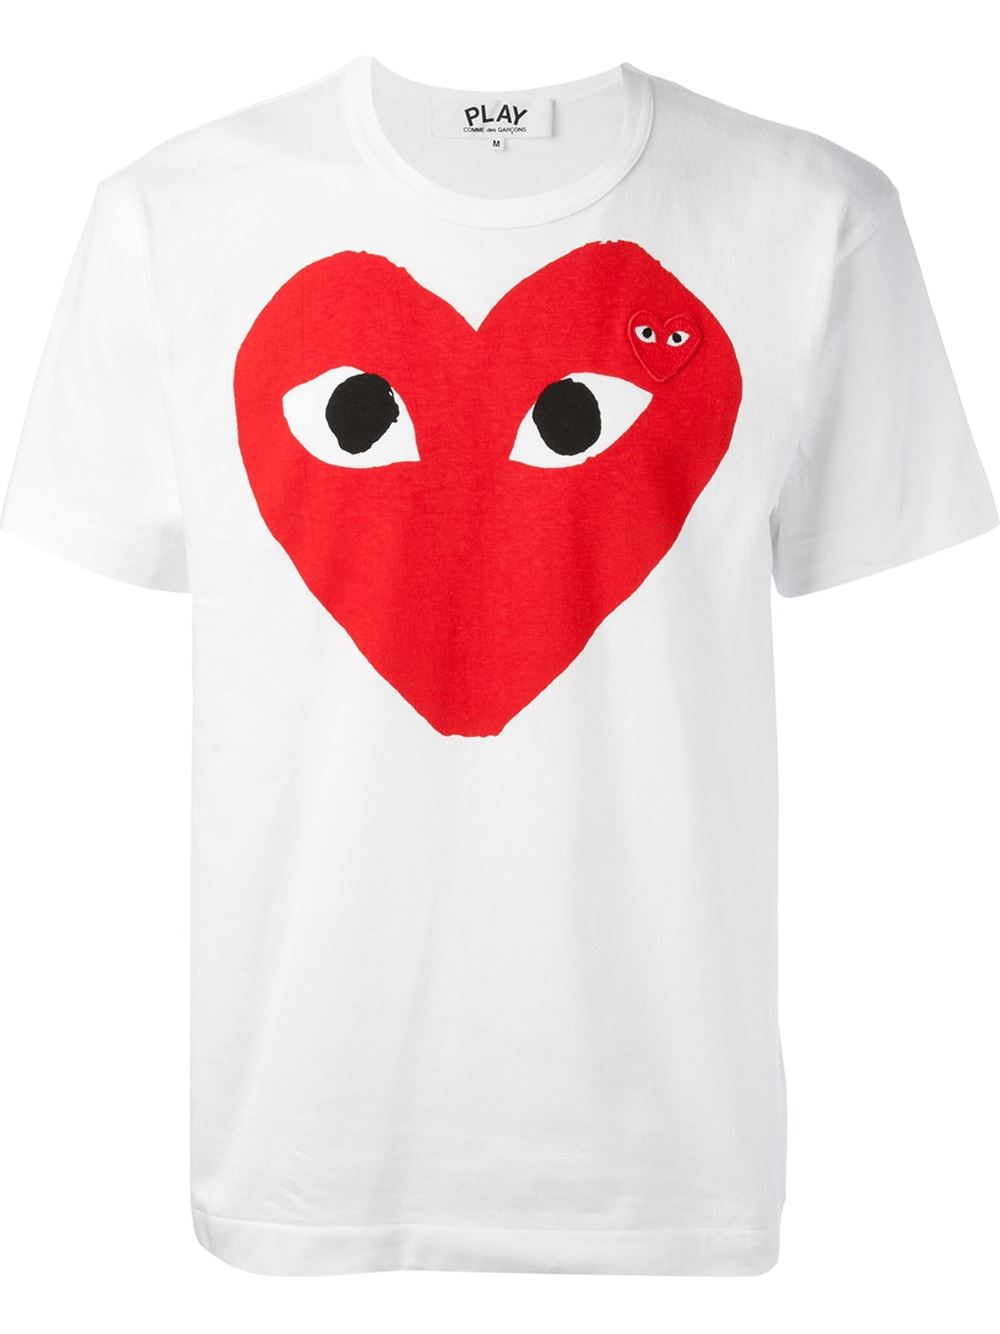 Play comme des garçons Comme Des Garçons Play Red Play T-shirt in White